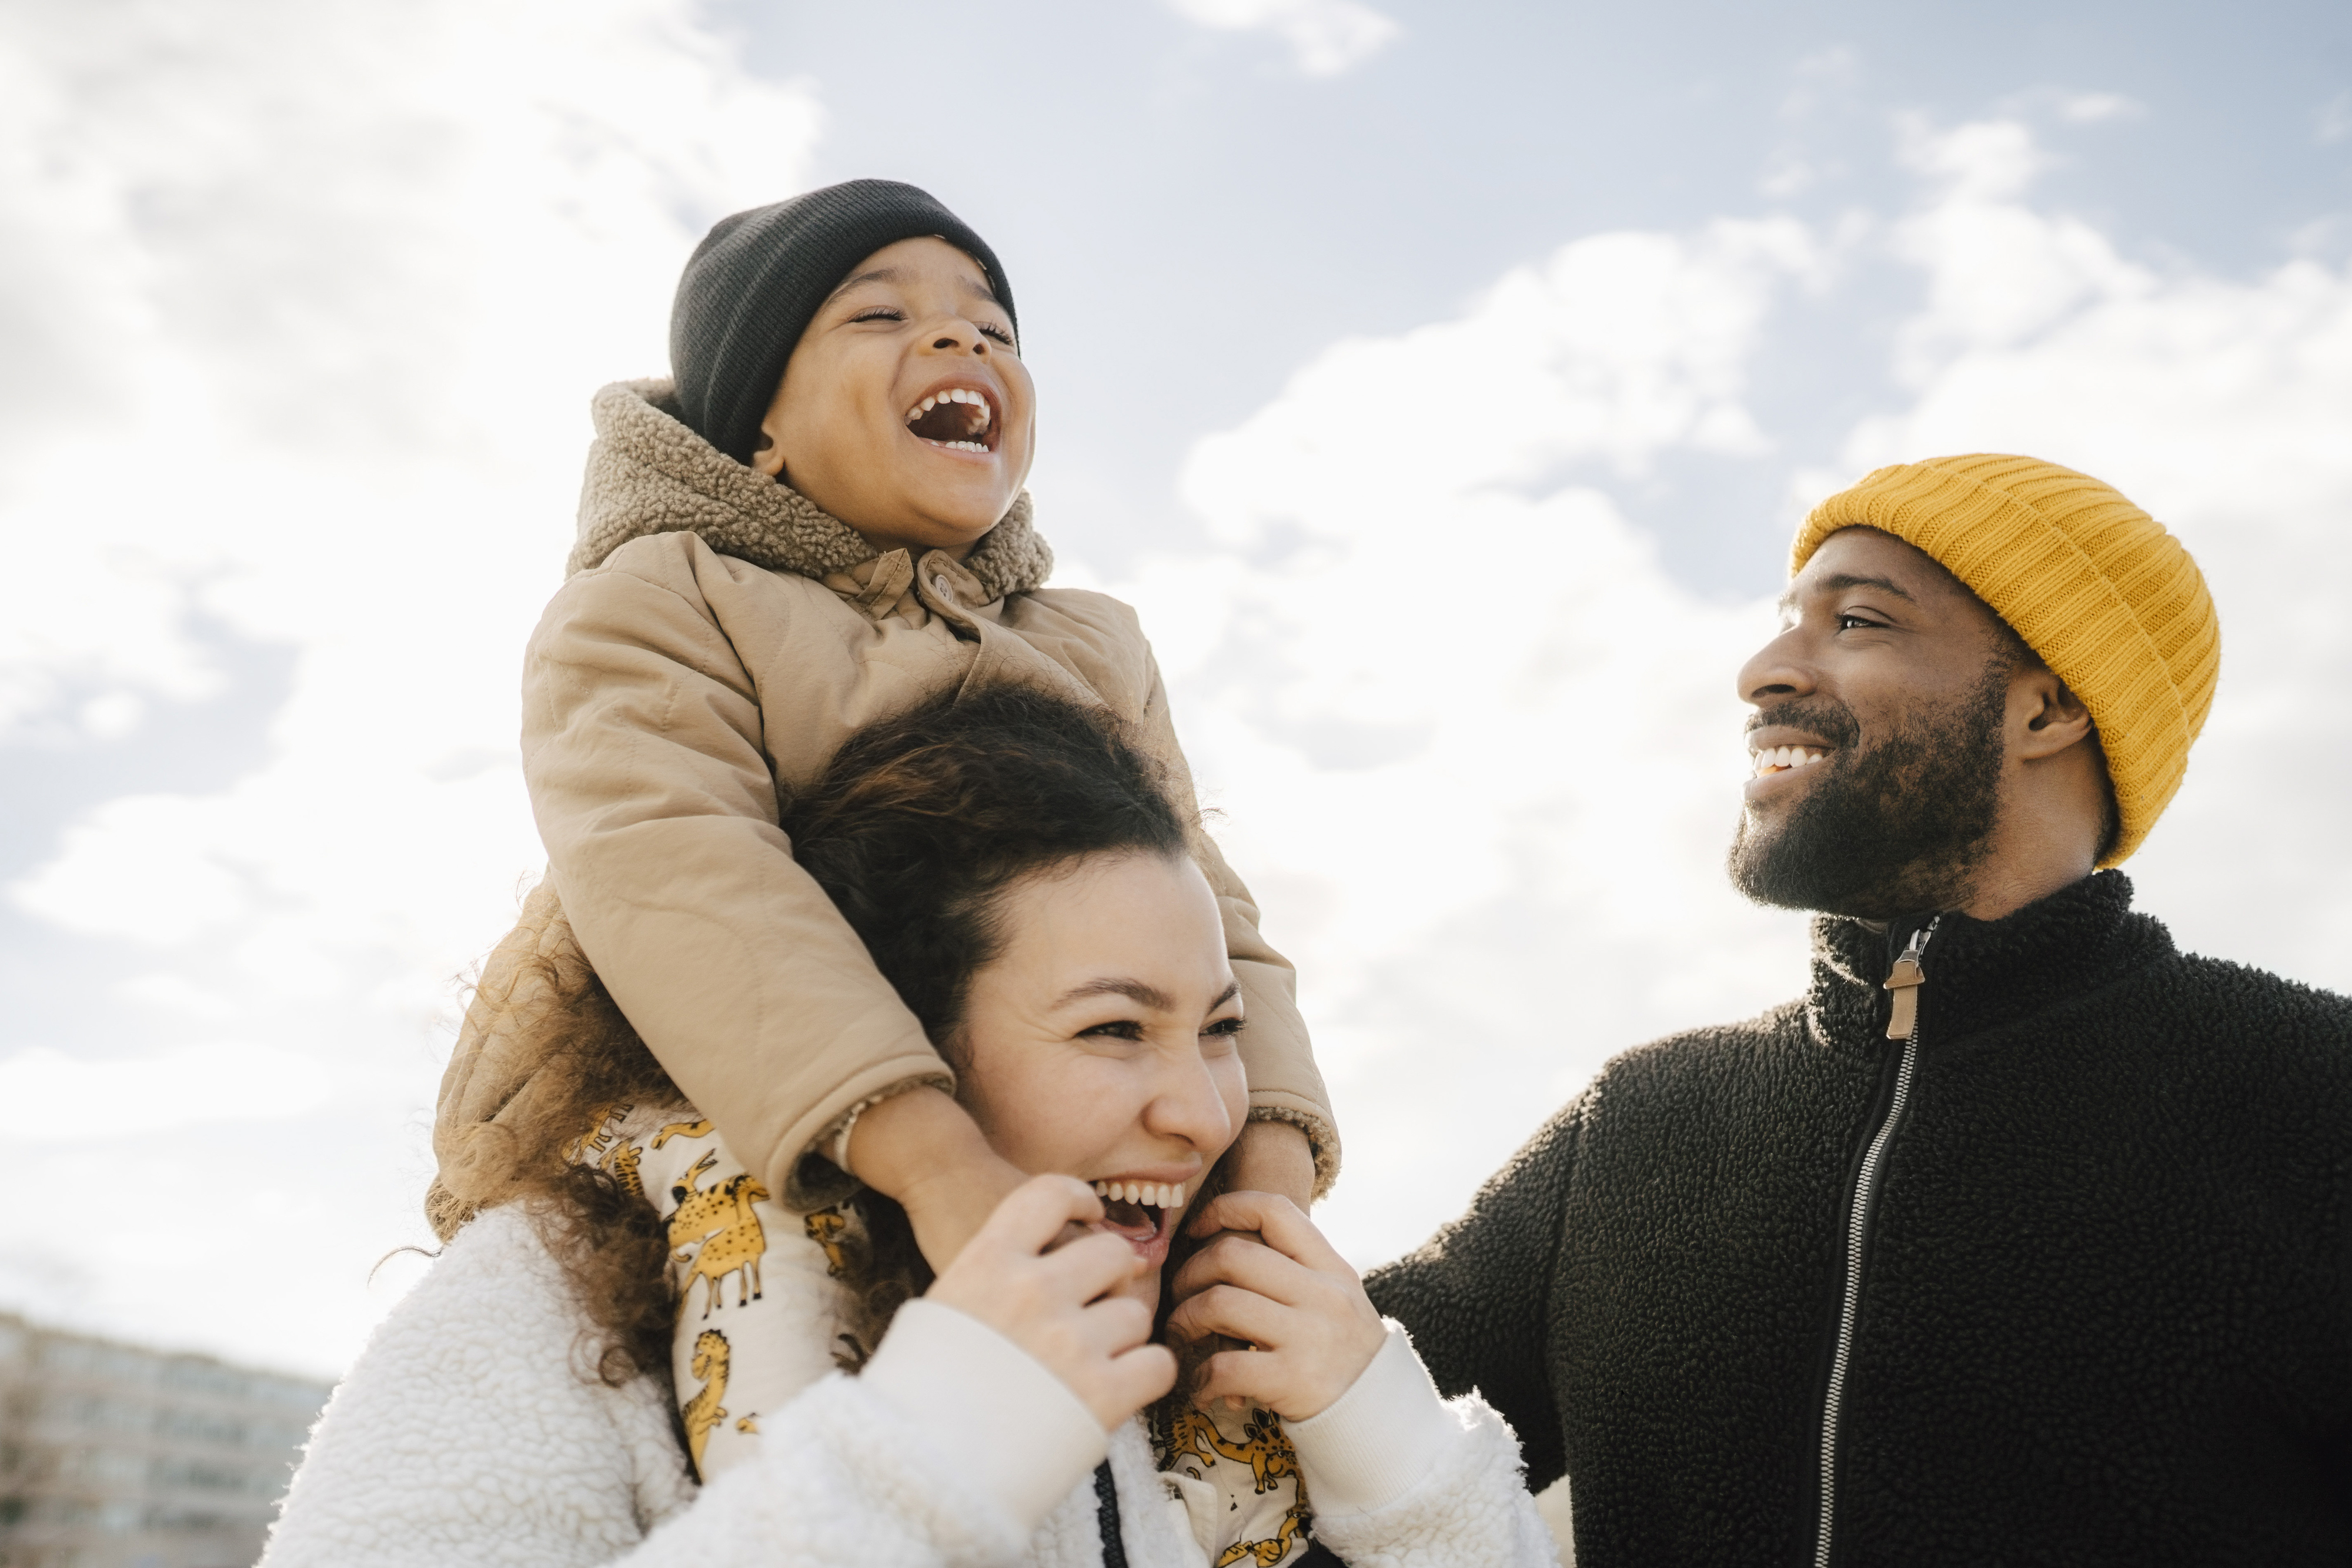 Child on woman&#x27;s shoulders, man beside them smiling, outdoors, casual attire, family moment